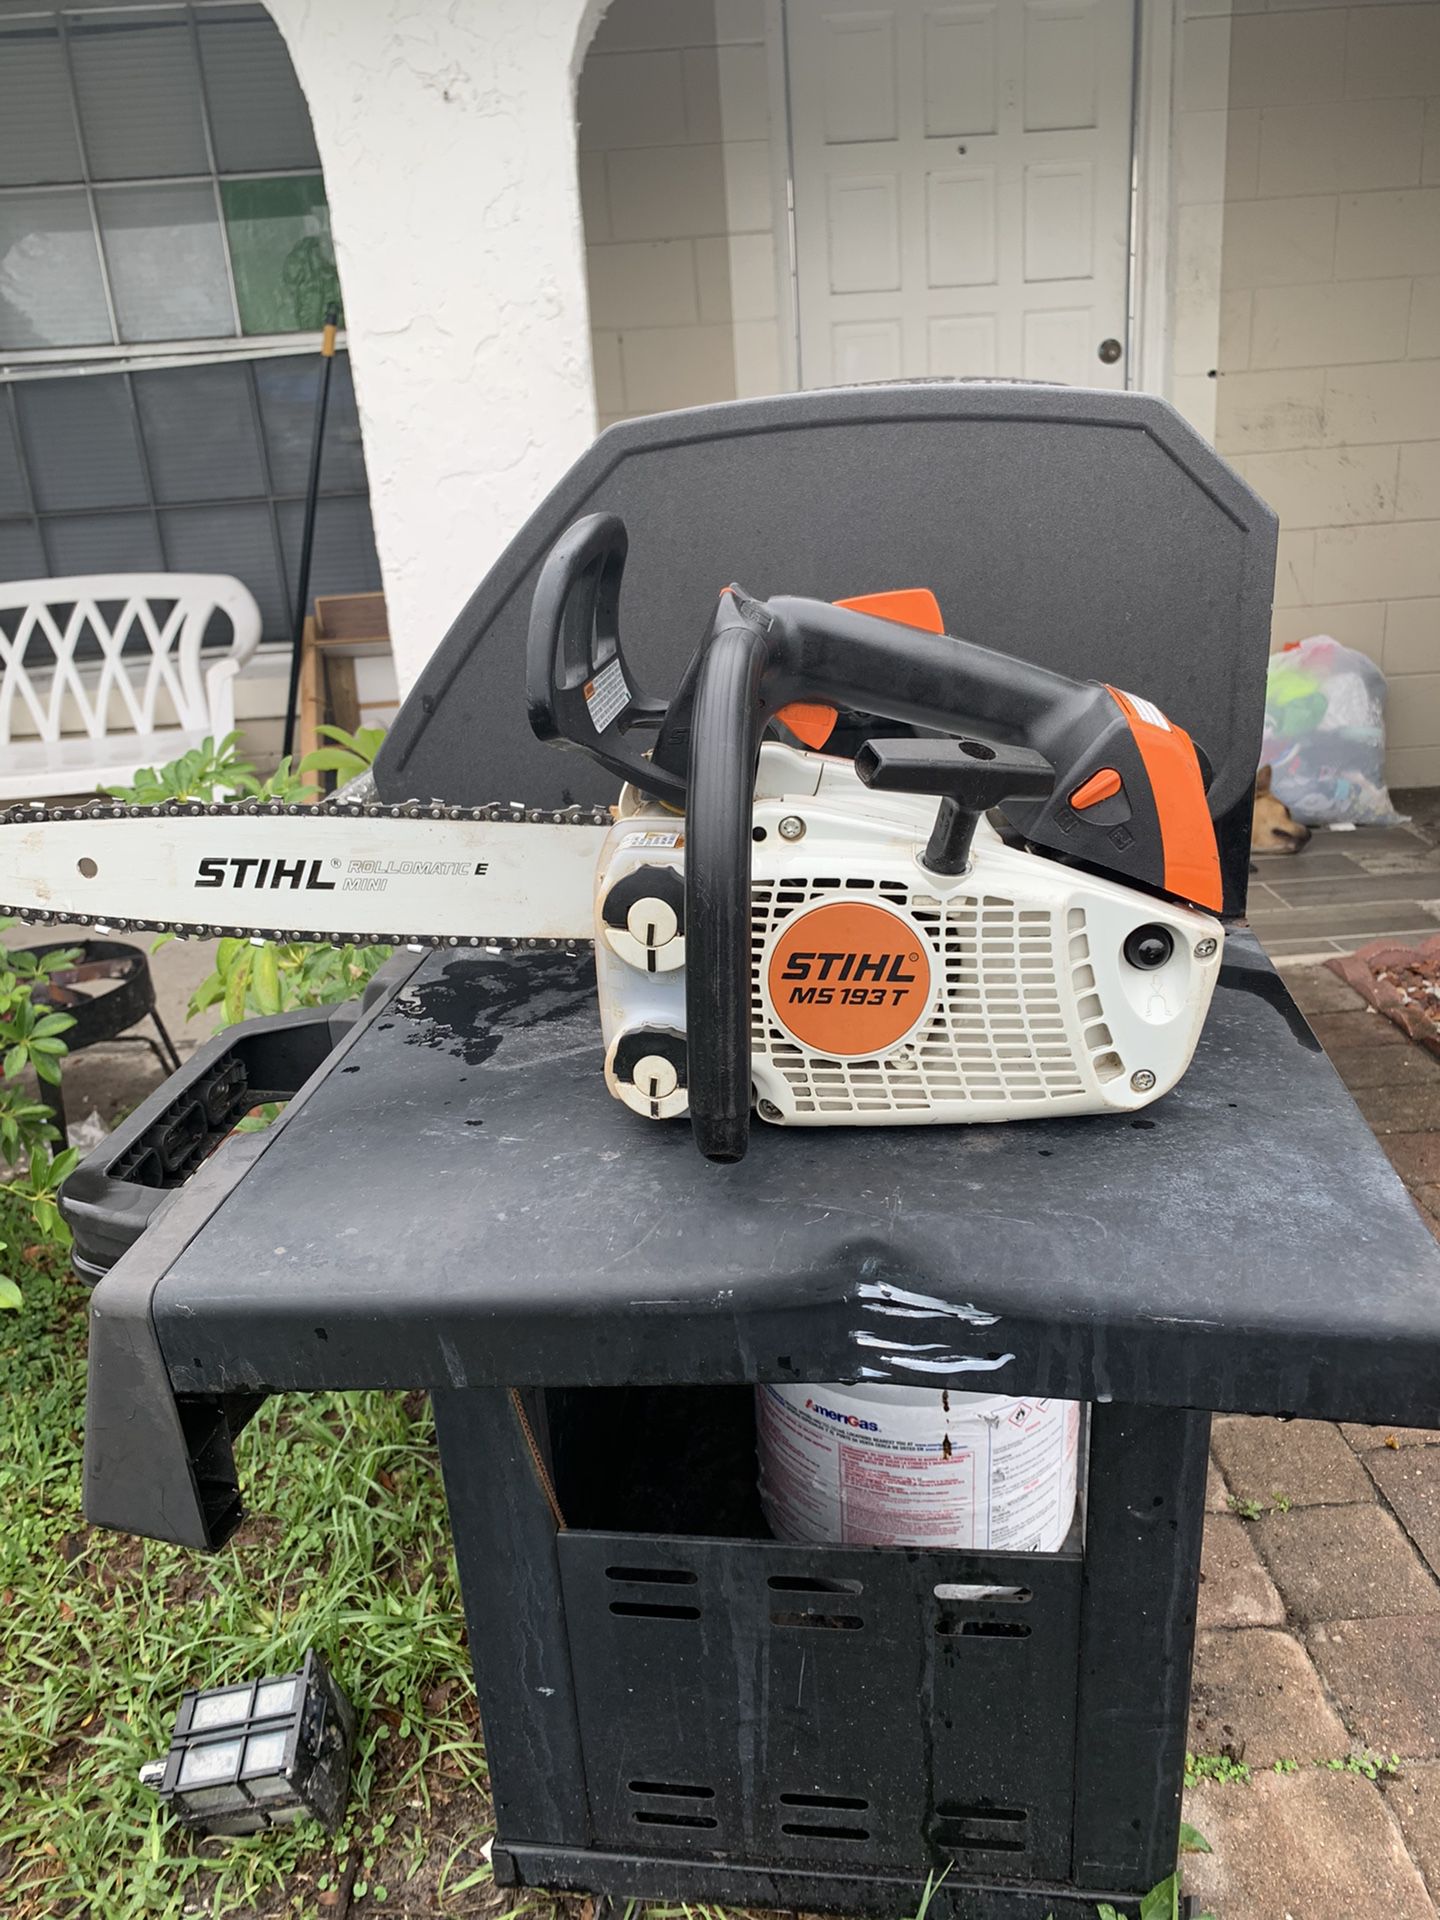 Echo blower and sthil chainsaw both in good working condition